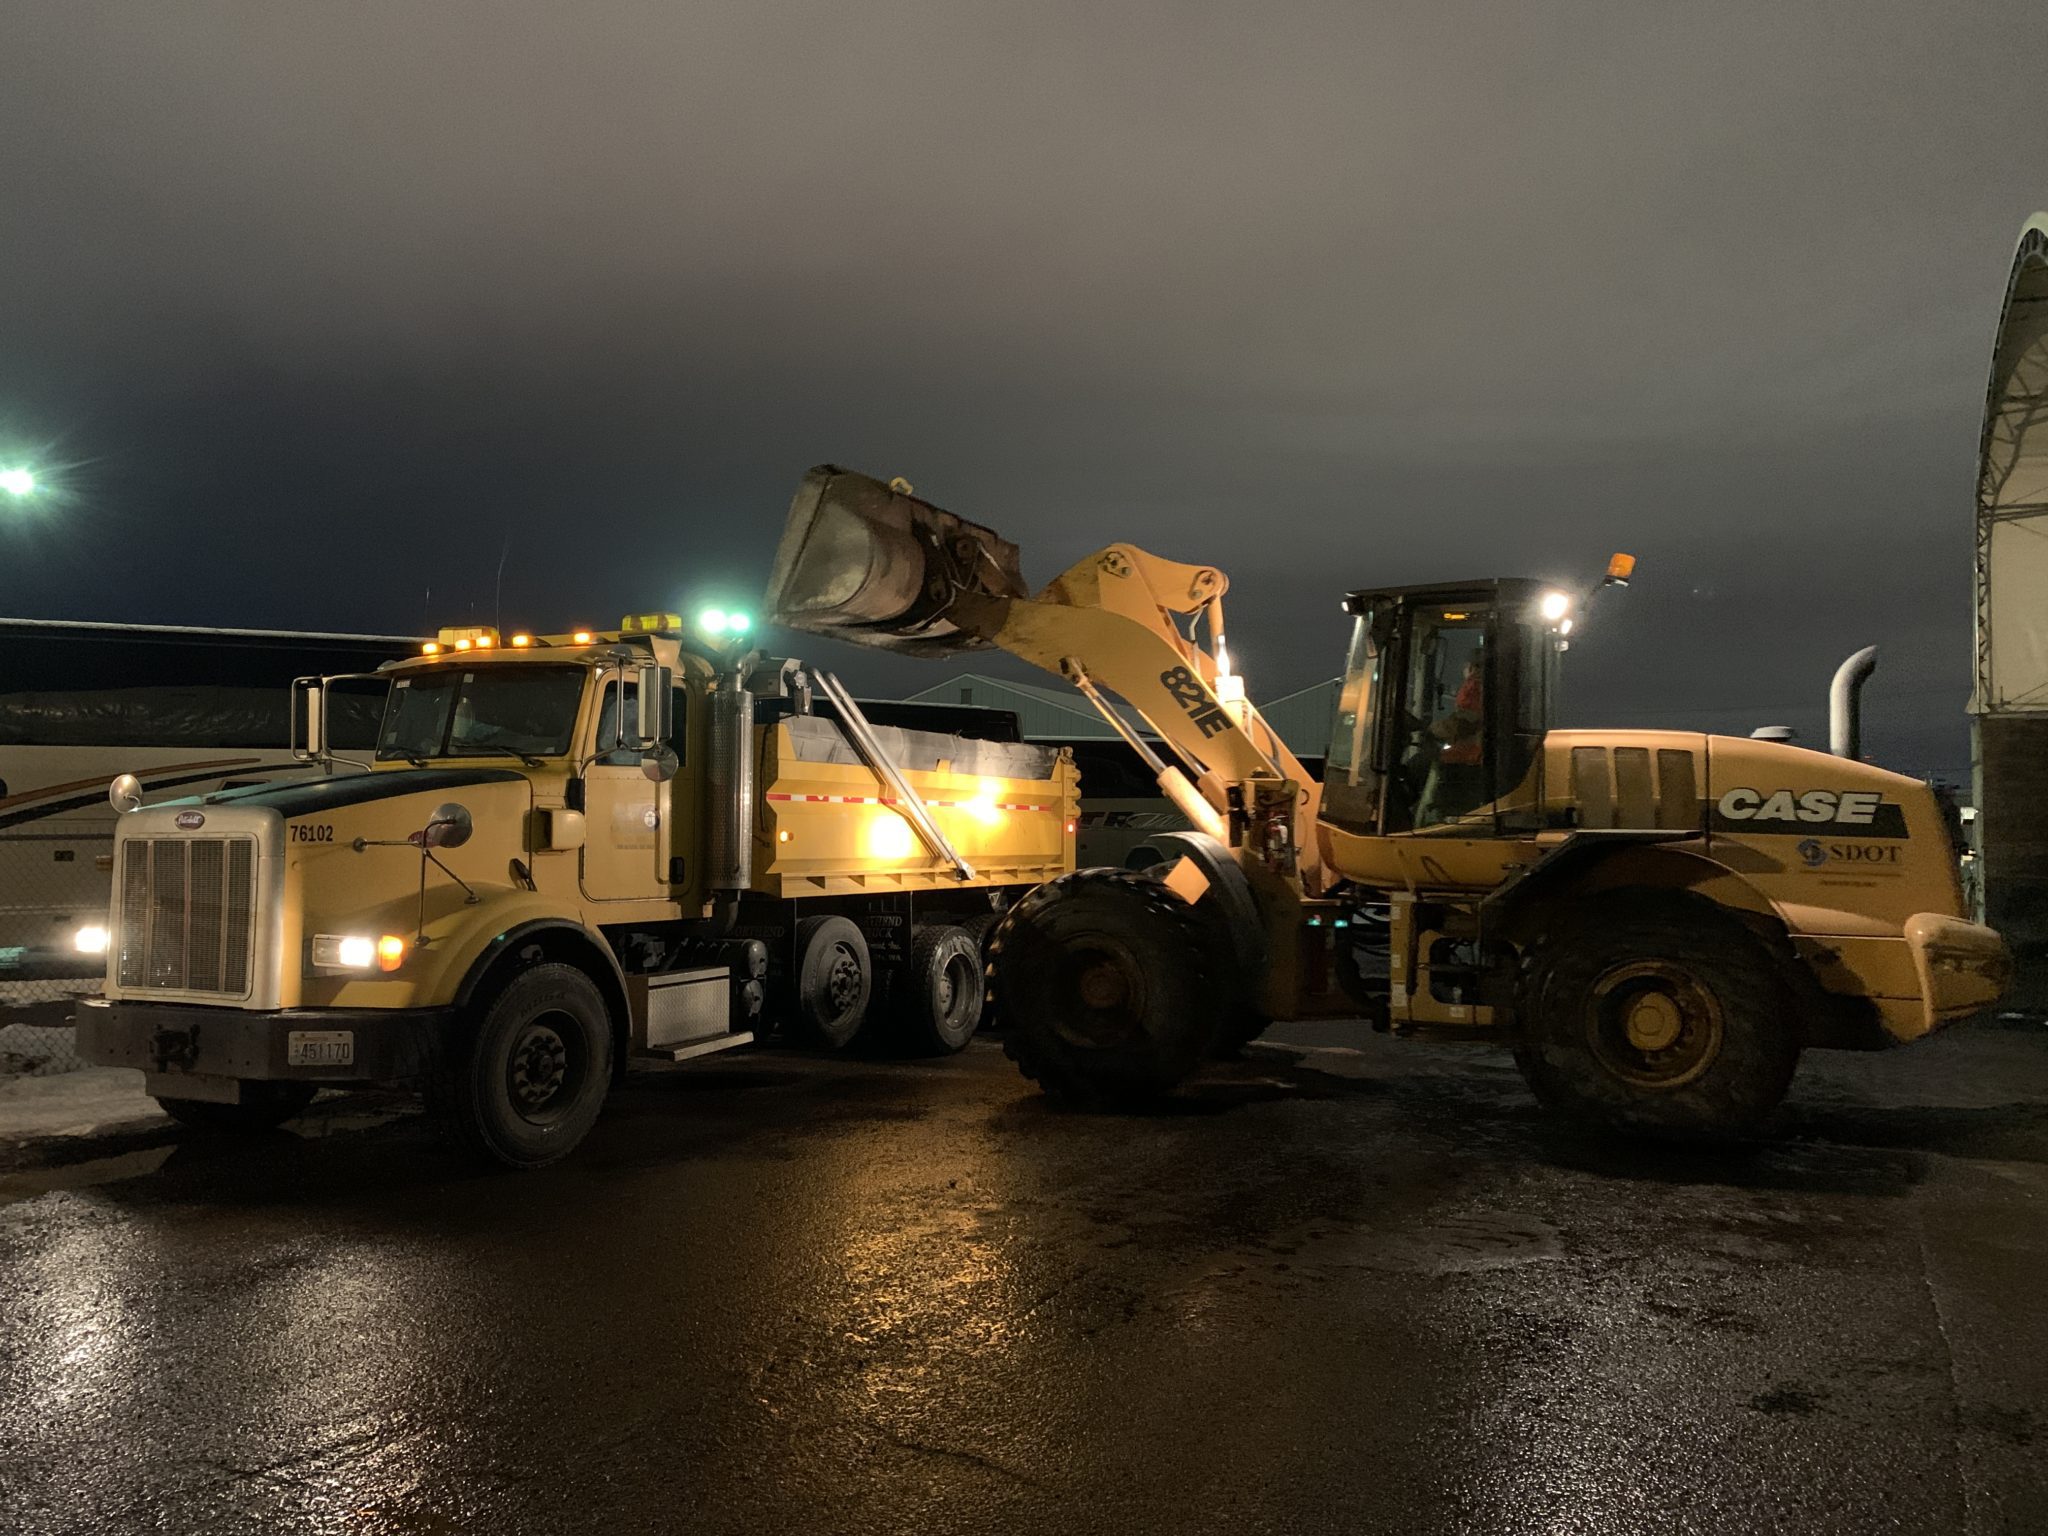 Workers operate two large pieces of heavy machinery to transfer salt to help de-ice streets and other locations in Seattle during the recent winter weather. The photo was taken at night and each vehicle is yellow, with wet pavement visible in the foreground.